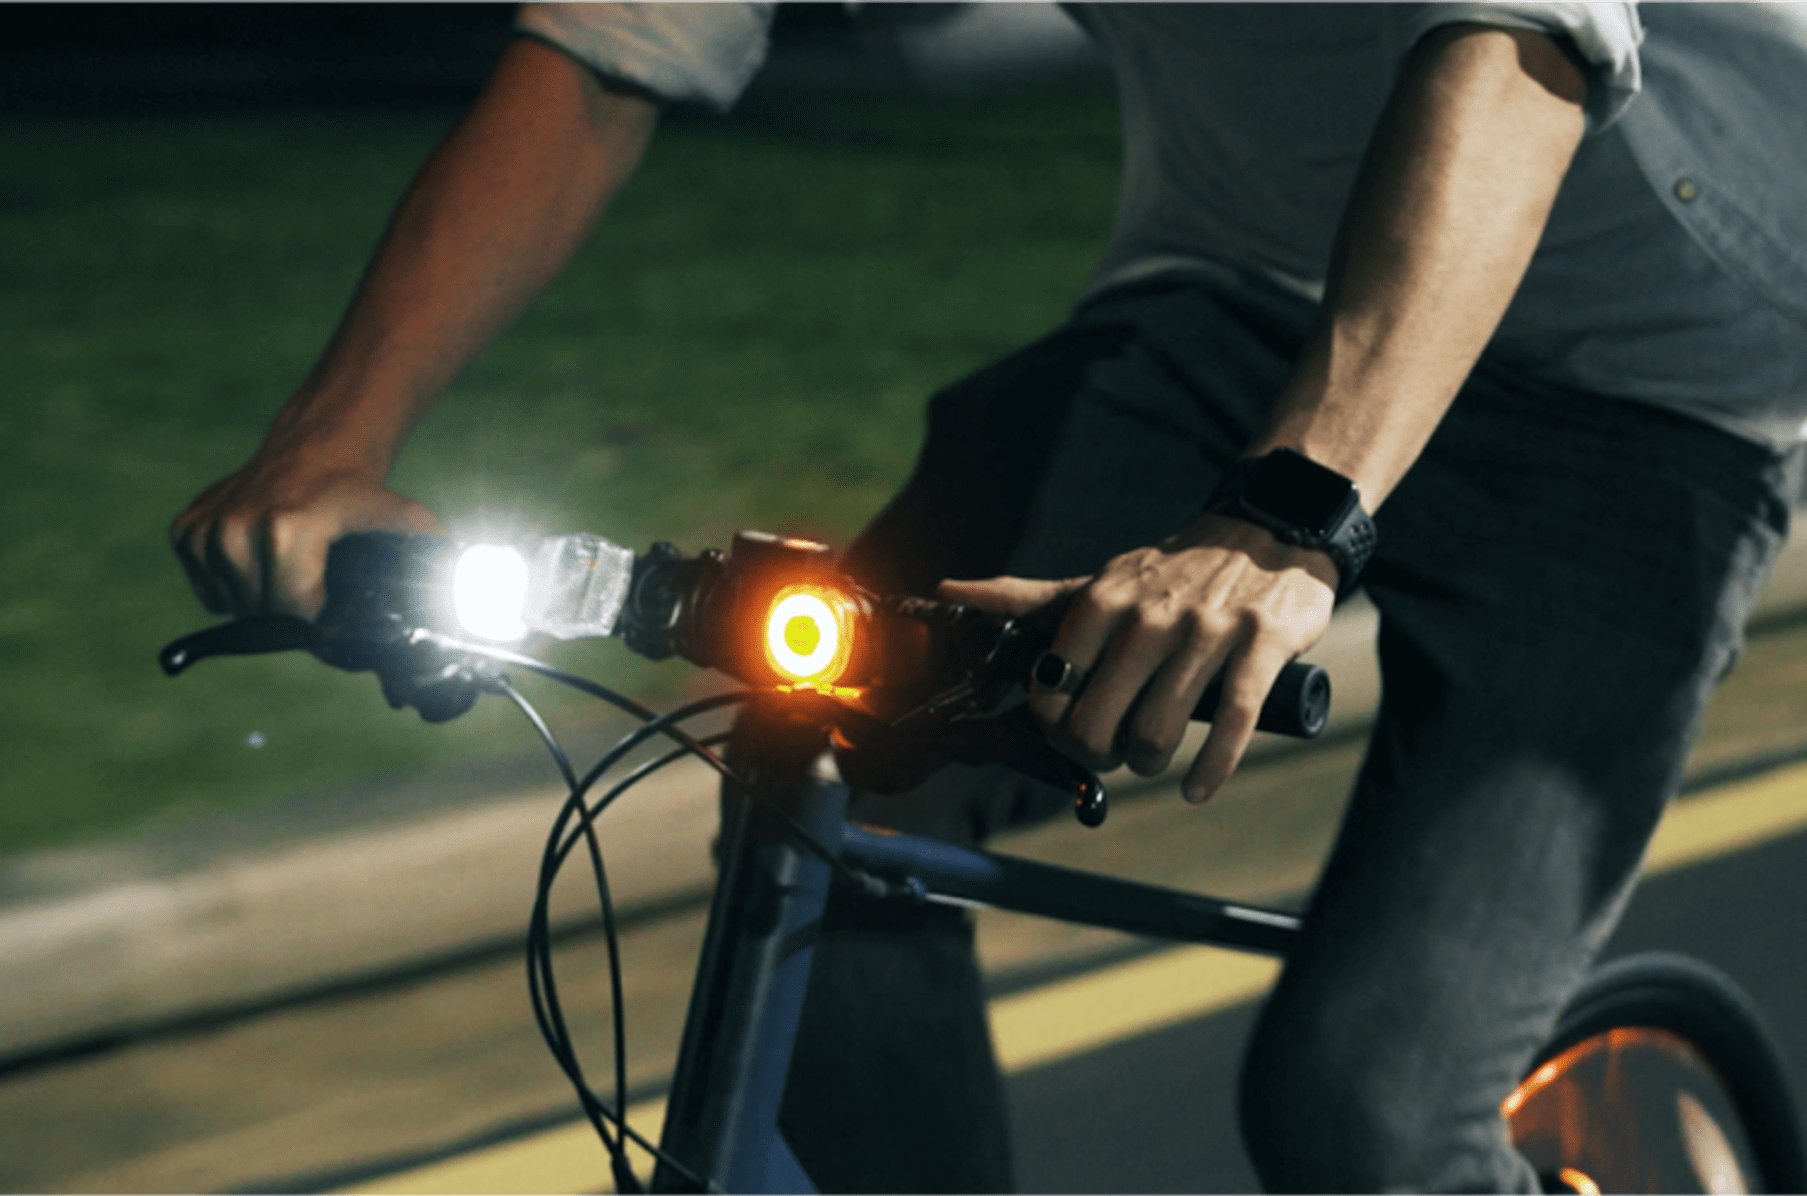 2-in-1 Bicycle Tail Light with Turn Signals and Dash Camera 1080P